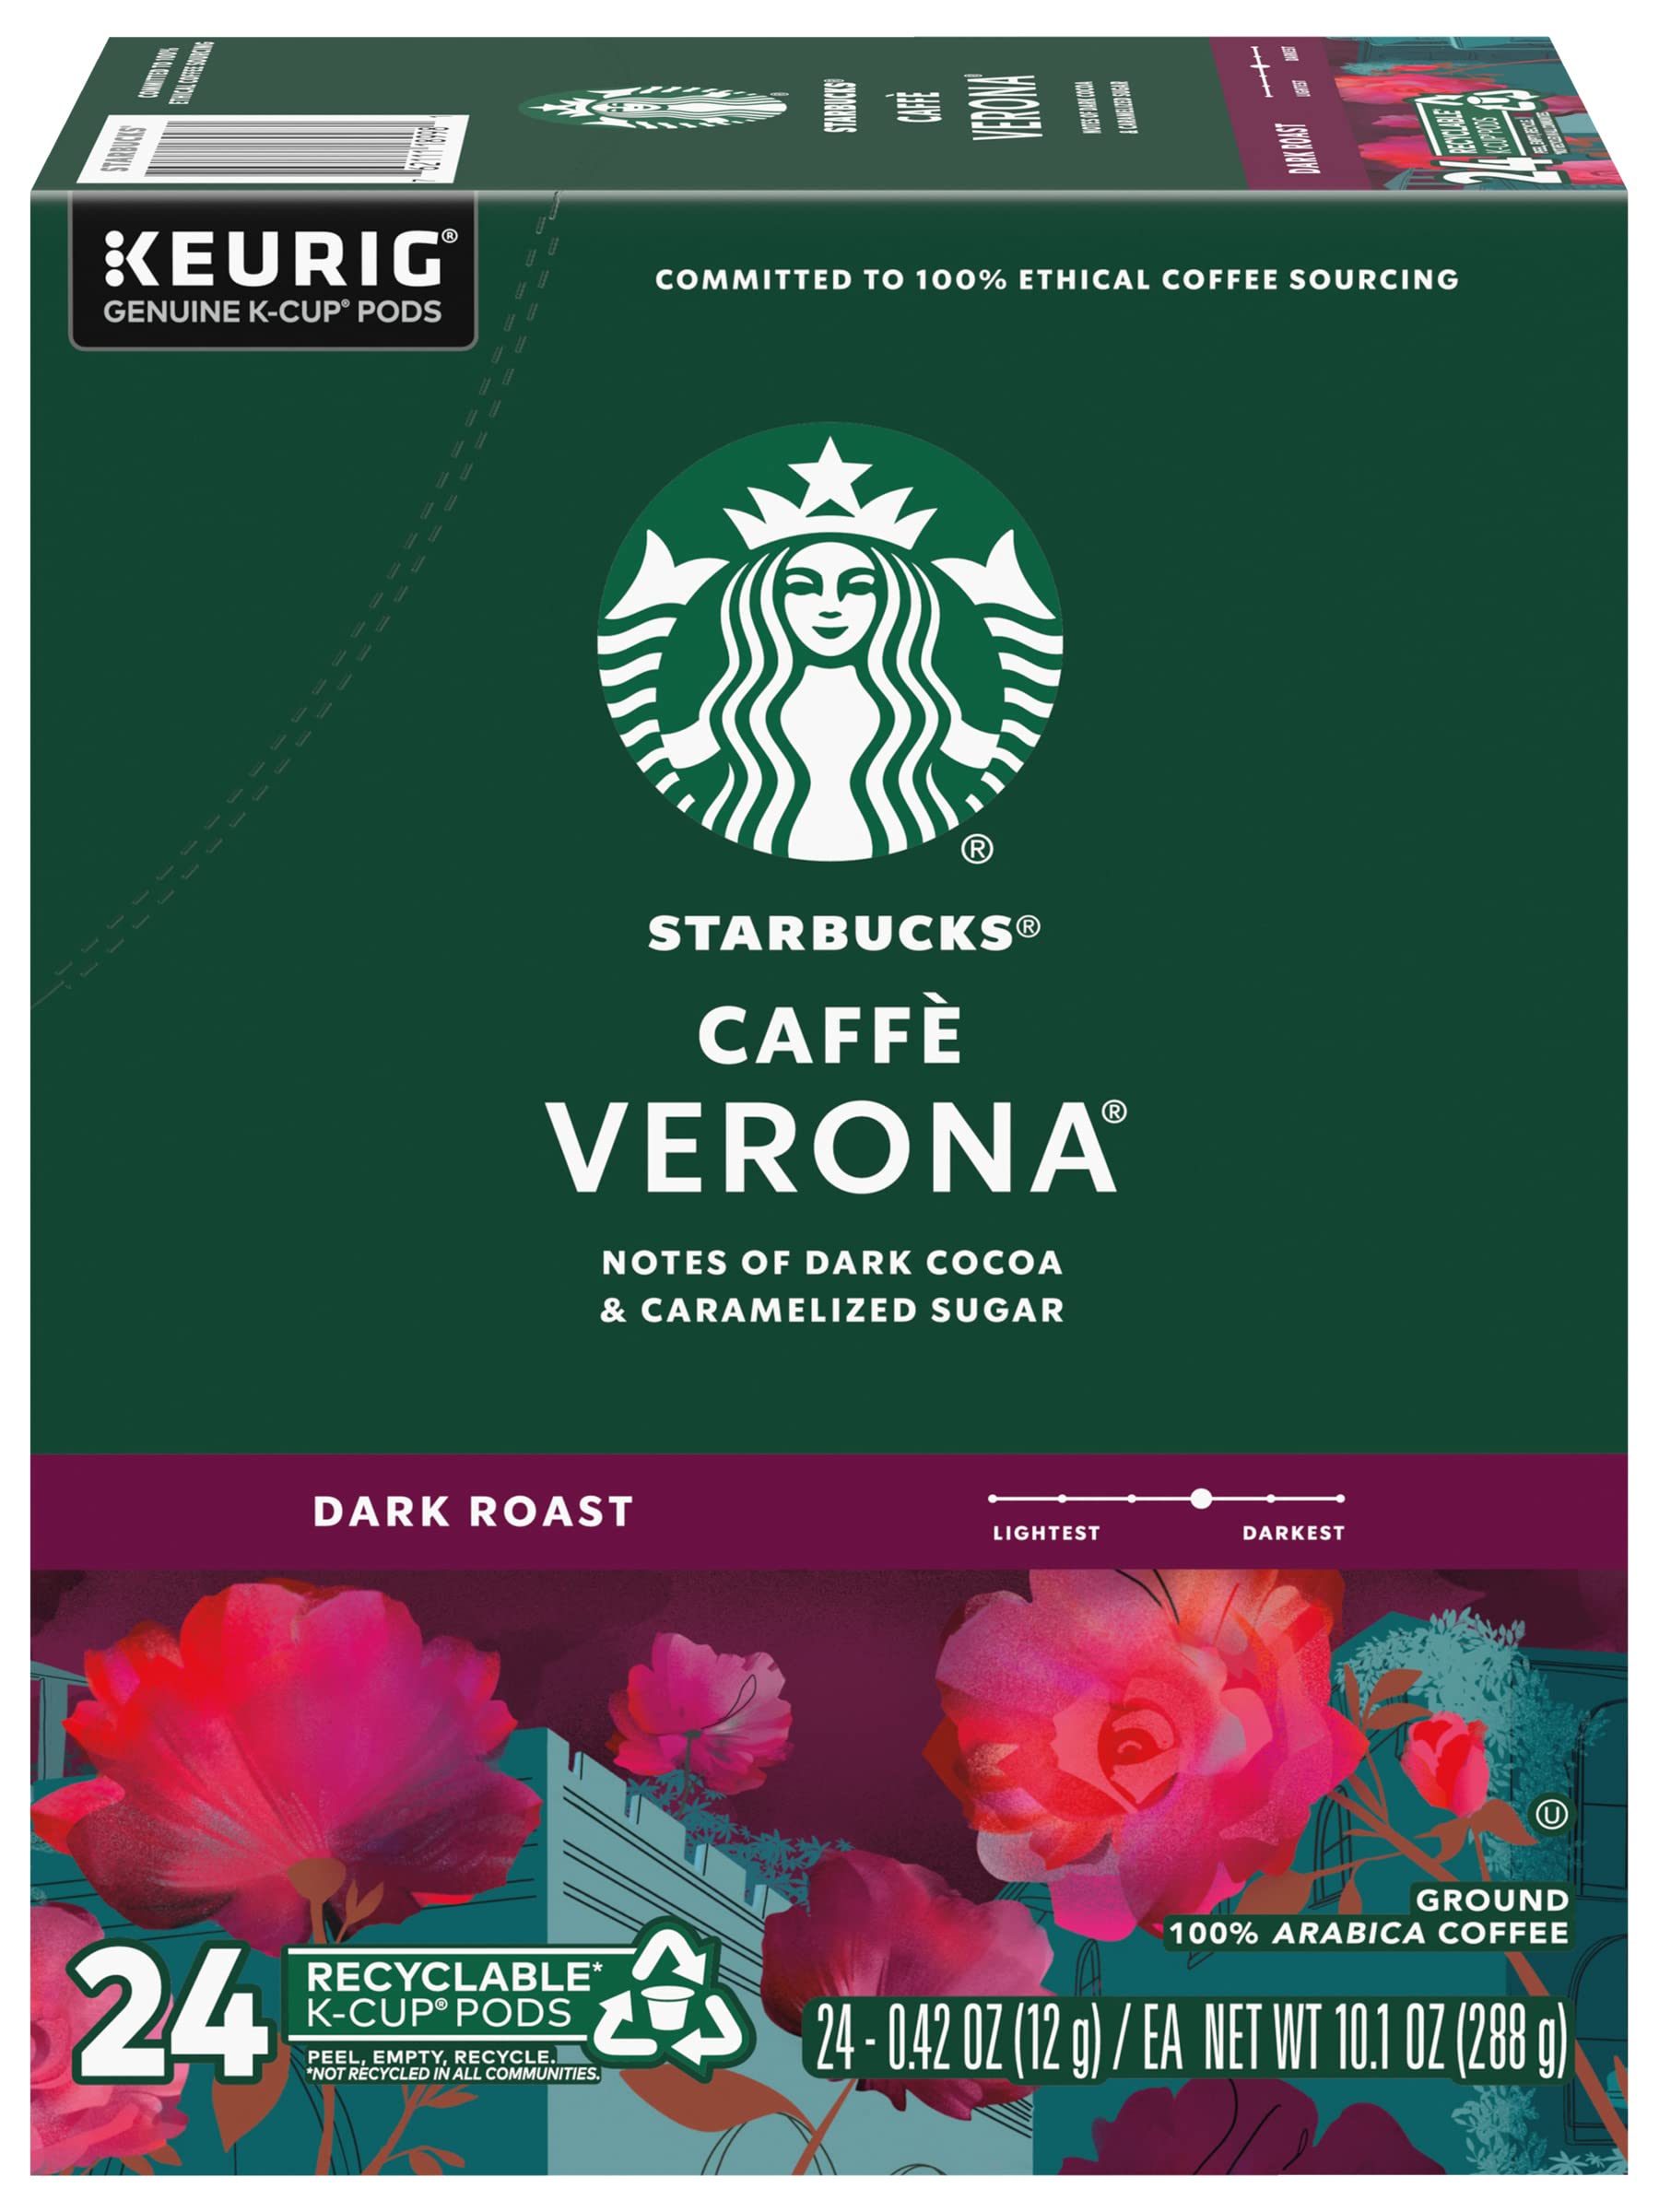 Book Cover Starbucks Coffee K-Cup Pods, Caffè Verona, Dark Roast Coffee, Notes of Dark Cocoa & Caramelized Sugar, Keurig Genuine K-Cup Pods, 24 CT K-Cups/Box (Pack of 1 Box) Verona 24 Count (Pack of 1)